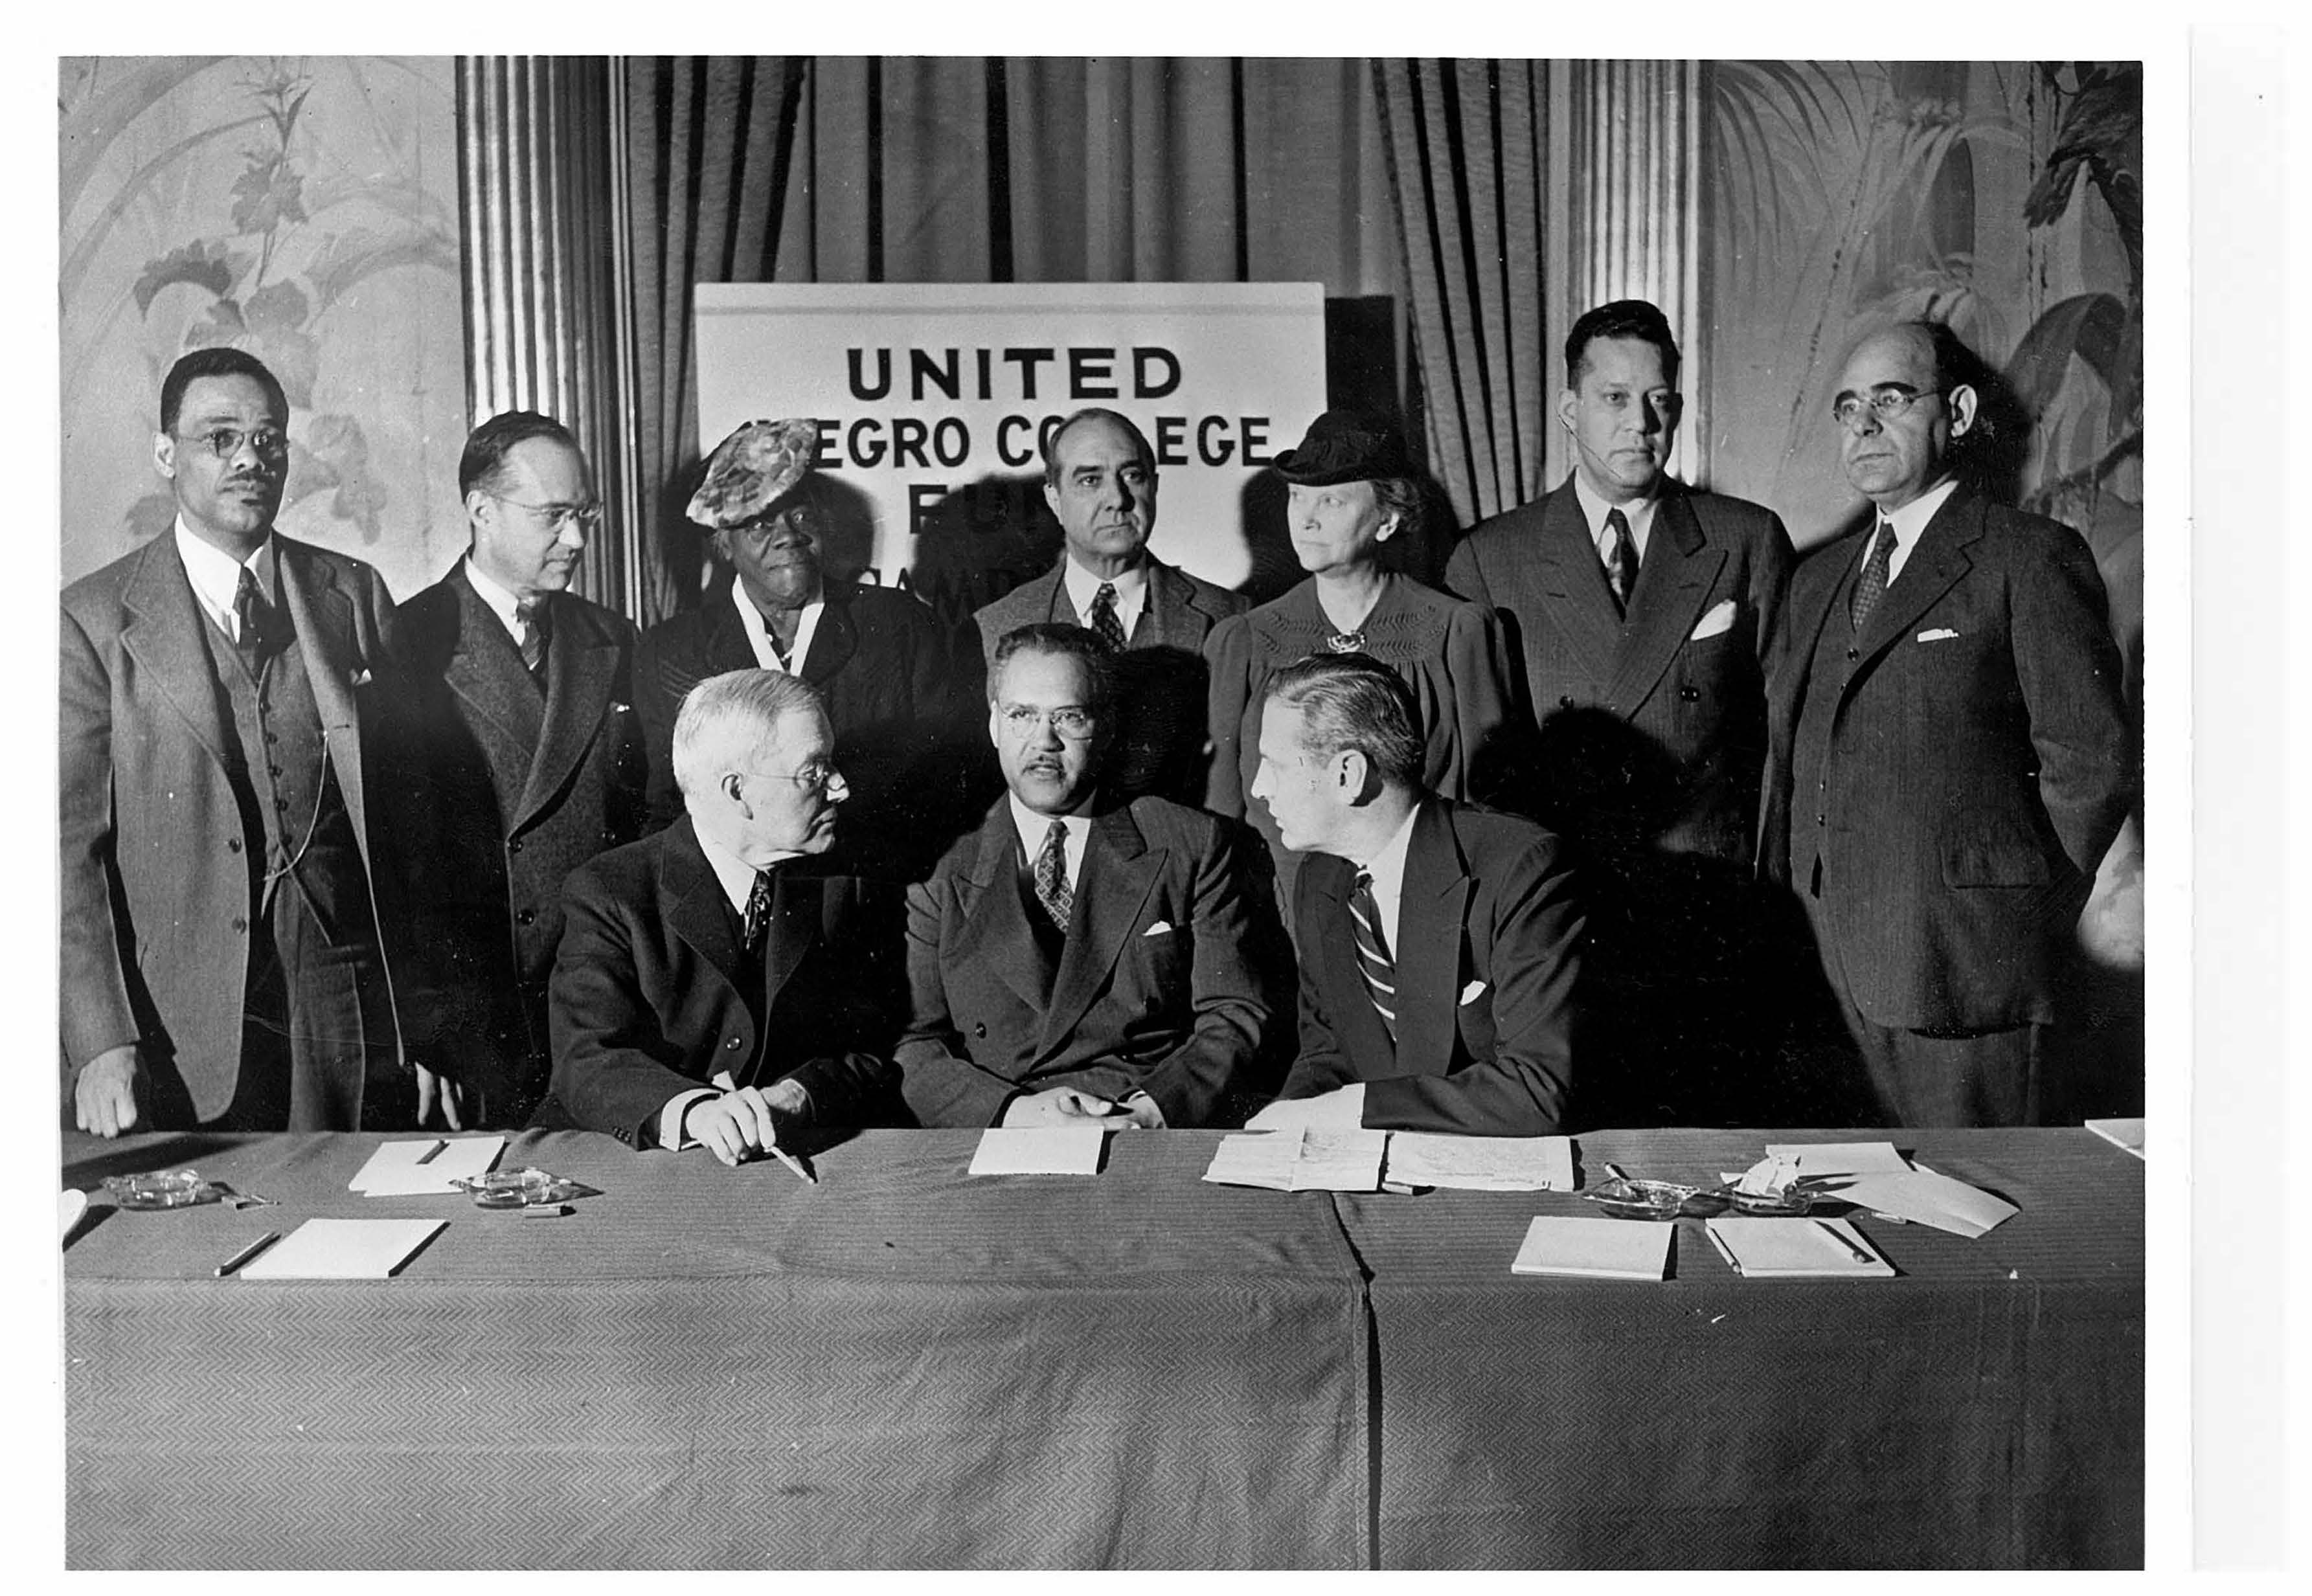 UNCF was founded on April 25, 1944, by Dr. Frederick D. Patterson, president, Tuskegee Institute (today Tuskegee University) (seated in the center) along with Dr. Mary McLeod Bethune, an advisor to the FDR Administration (third from left standing). John Rockefeller II is seated on Patterson’s left and Walter Hoving, then the president of Lord & Taylor, on his right. Others in the photo were members of UNCF’s board. UNITED NEGRO COLLEGE FUND